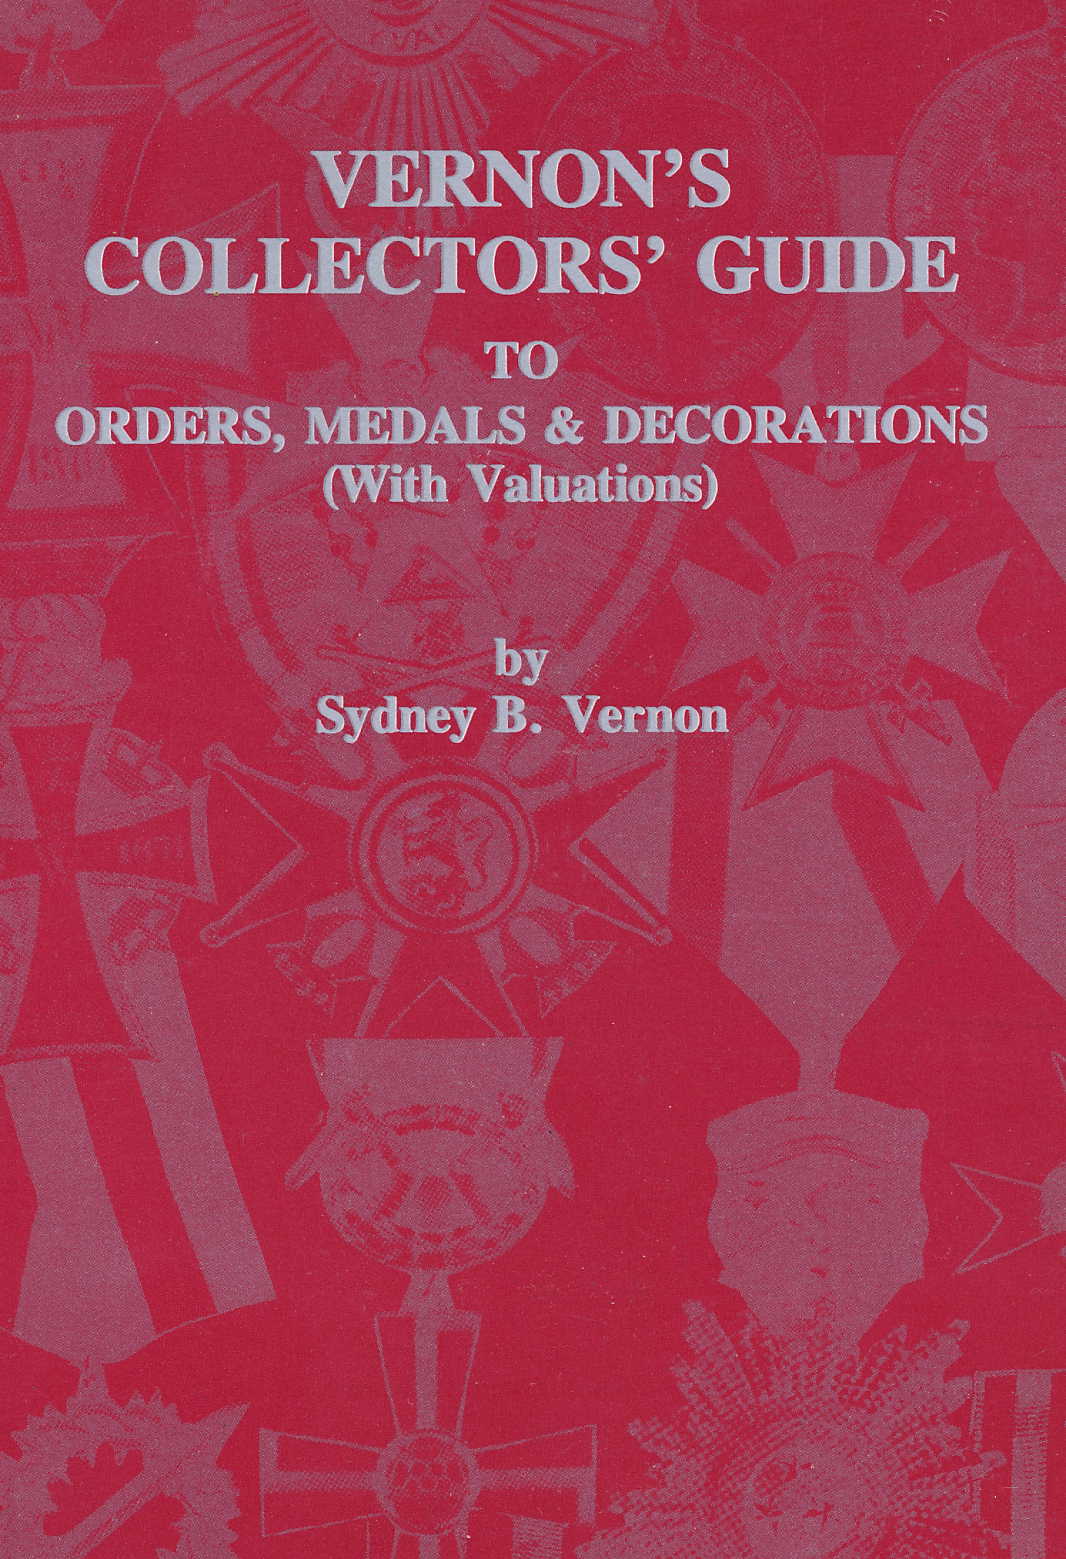 Vernon, Sydney B. Vernon's Collectors' Guide to Orders, Medals